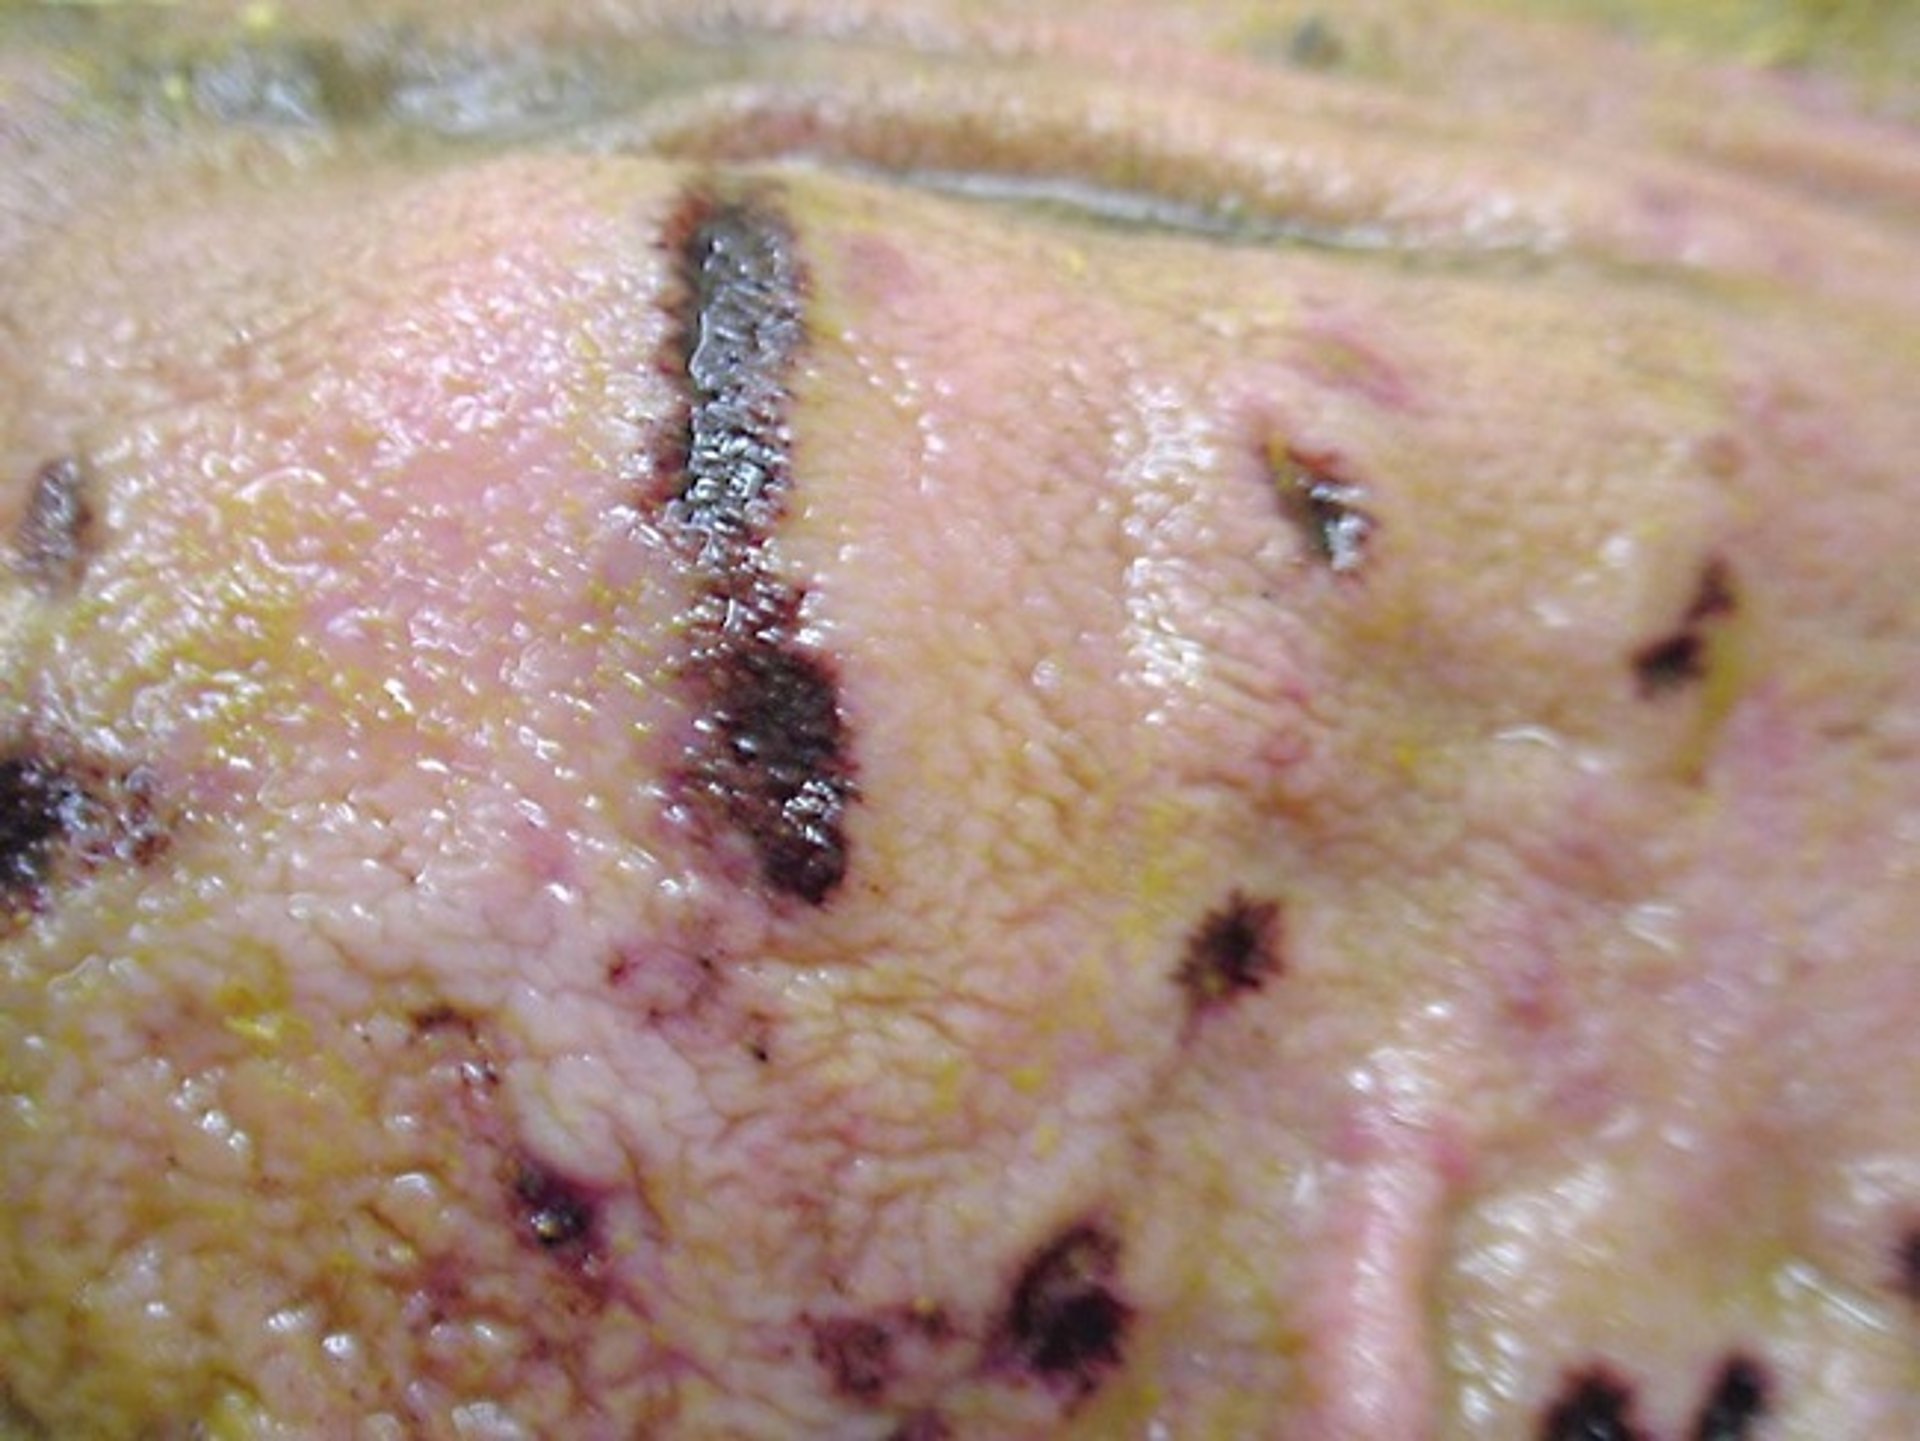 Abomasal ulcer, cow